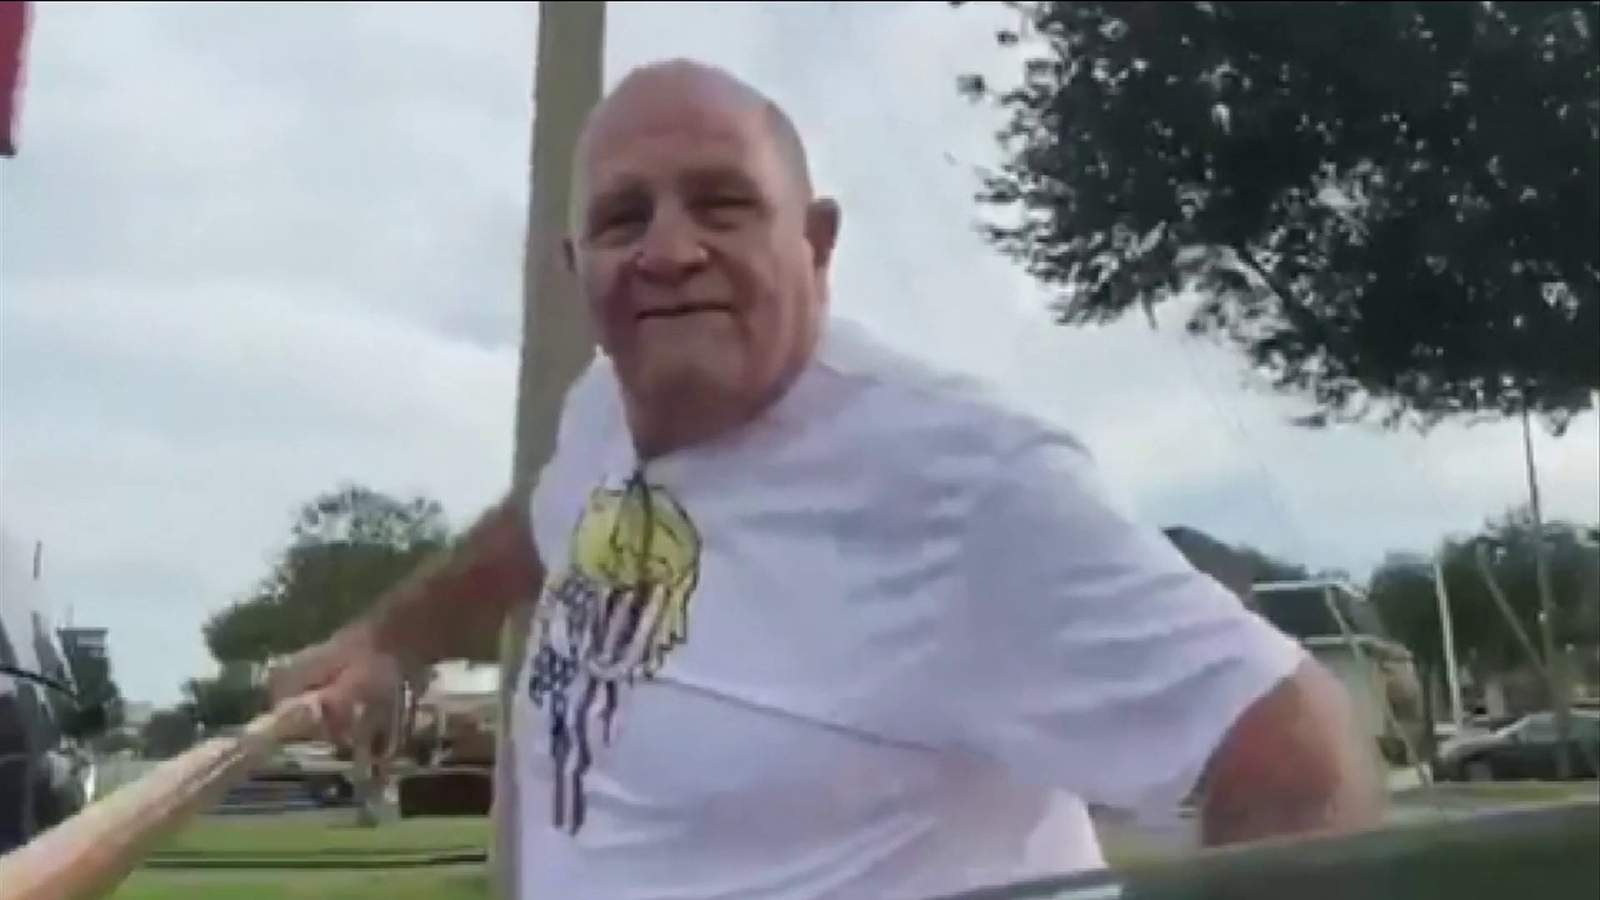 Florida man, 67, hit girl in face with flagpole in spat over Trump, deputies say